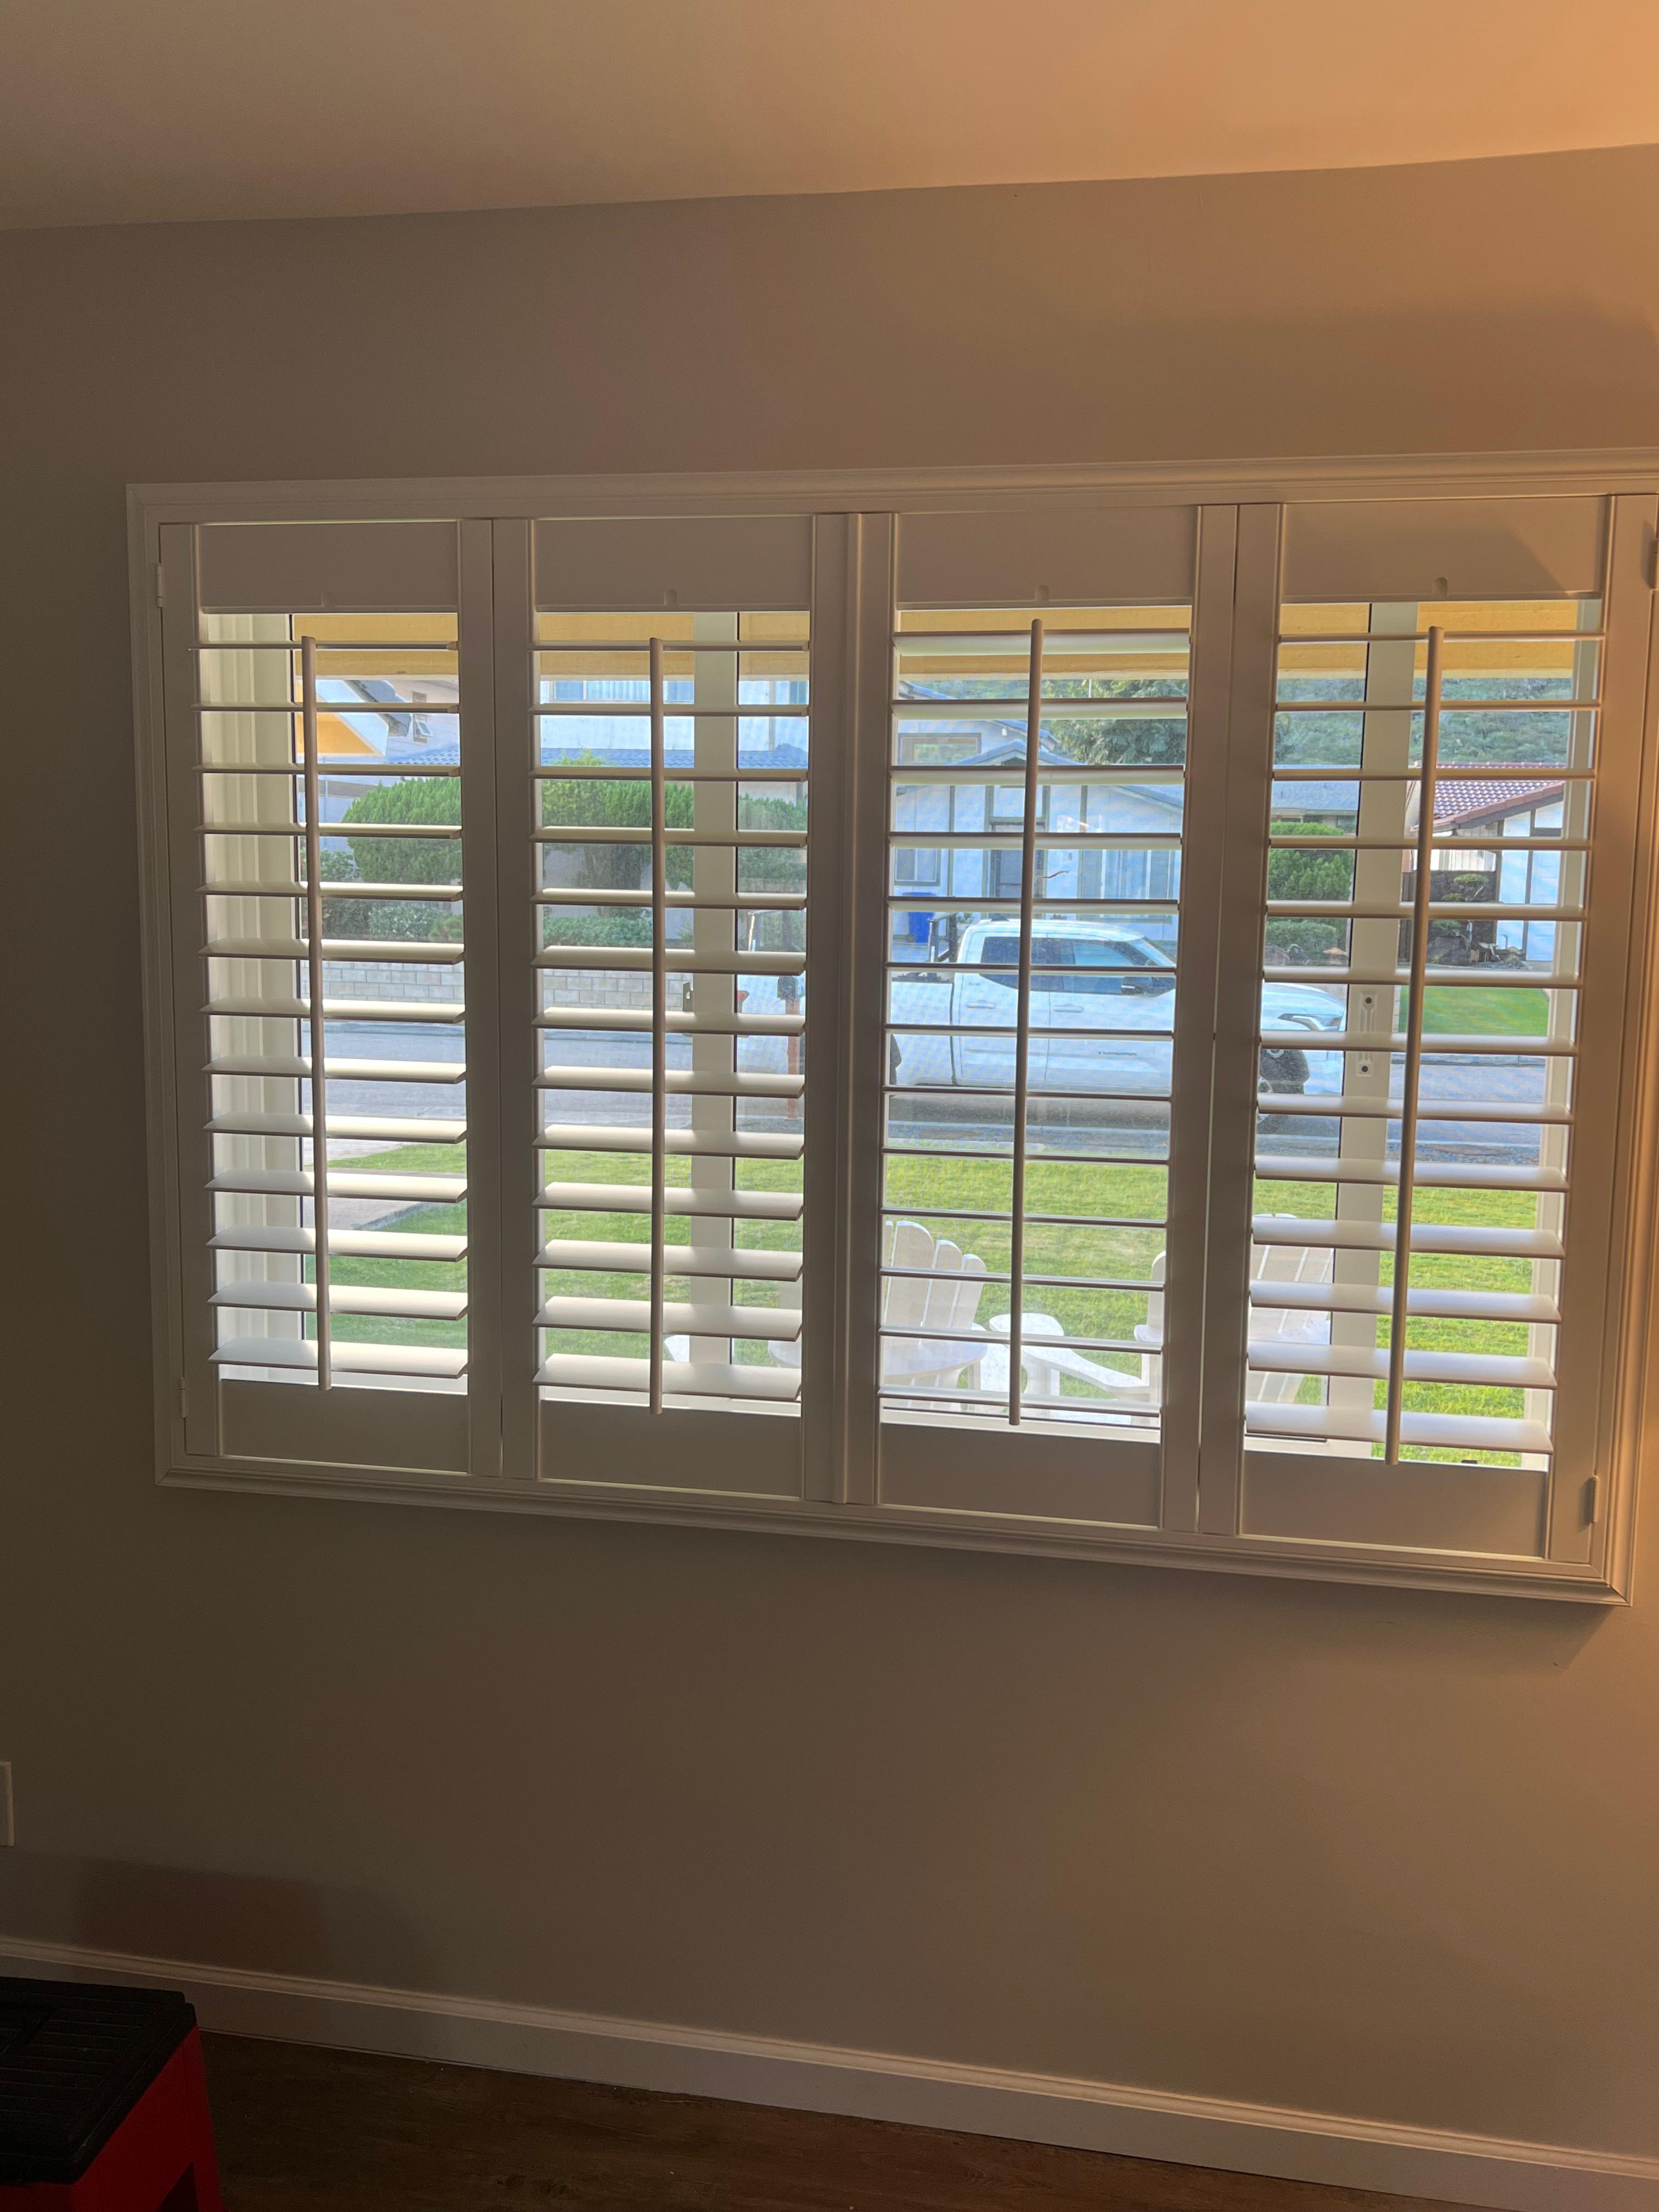 Kalama Valley composite shutters